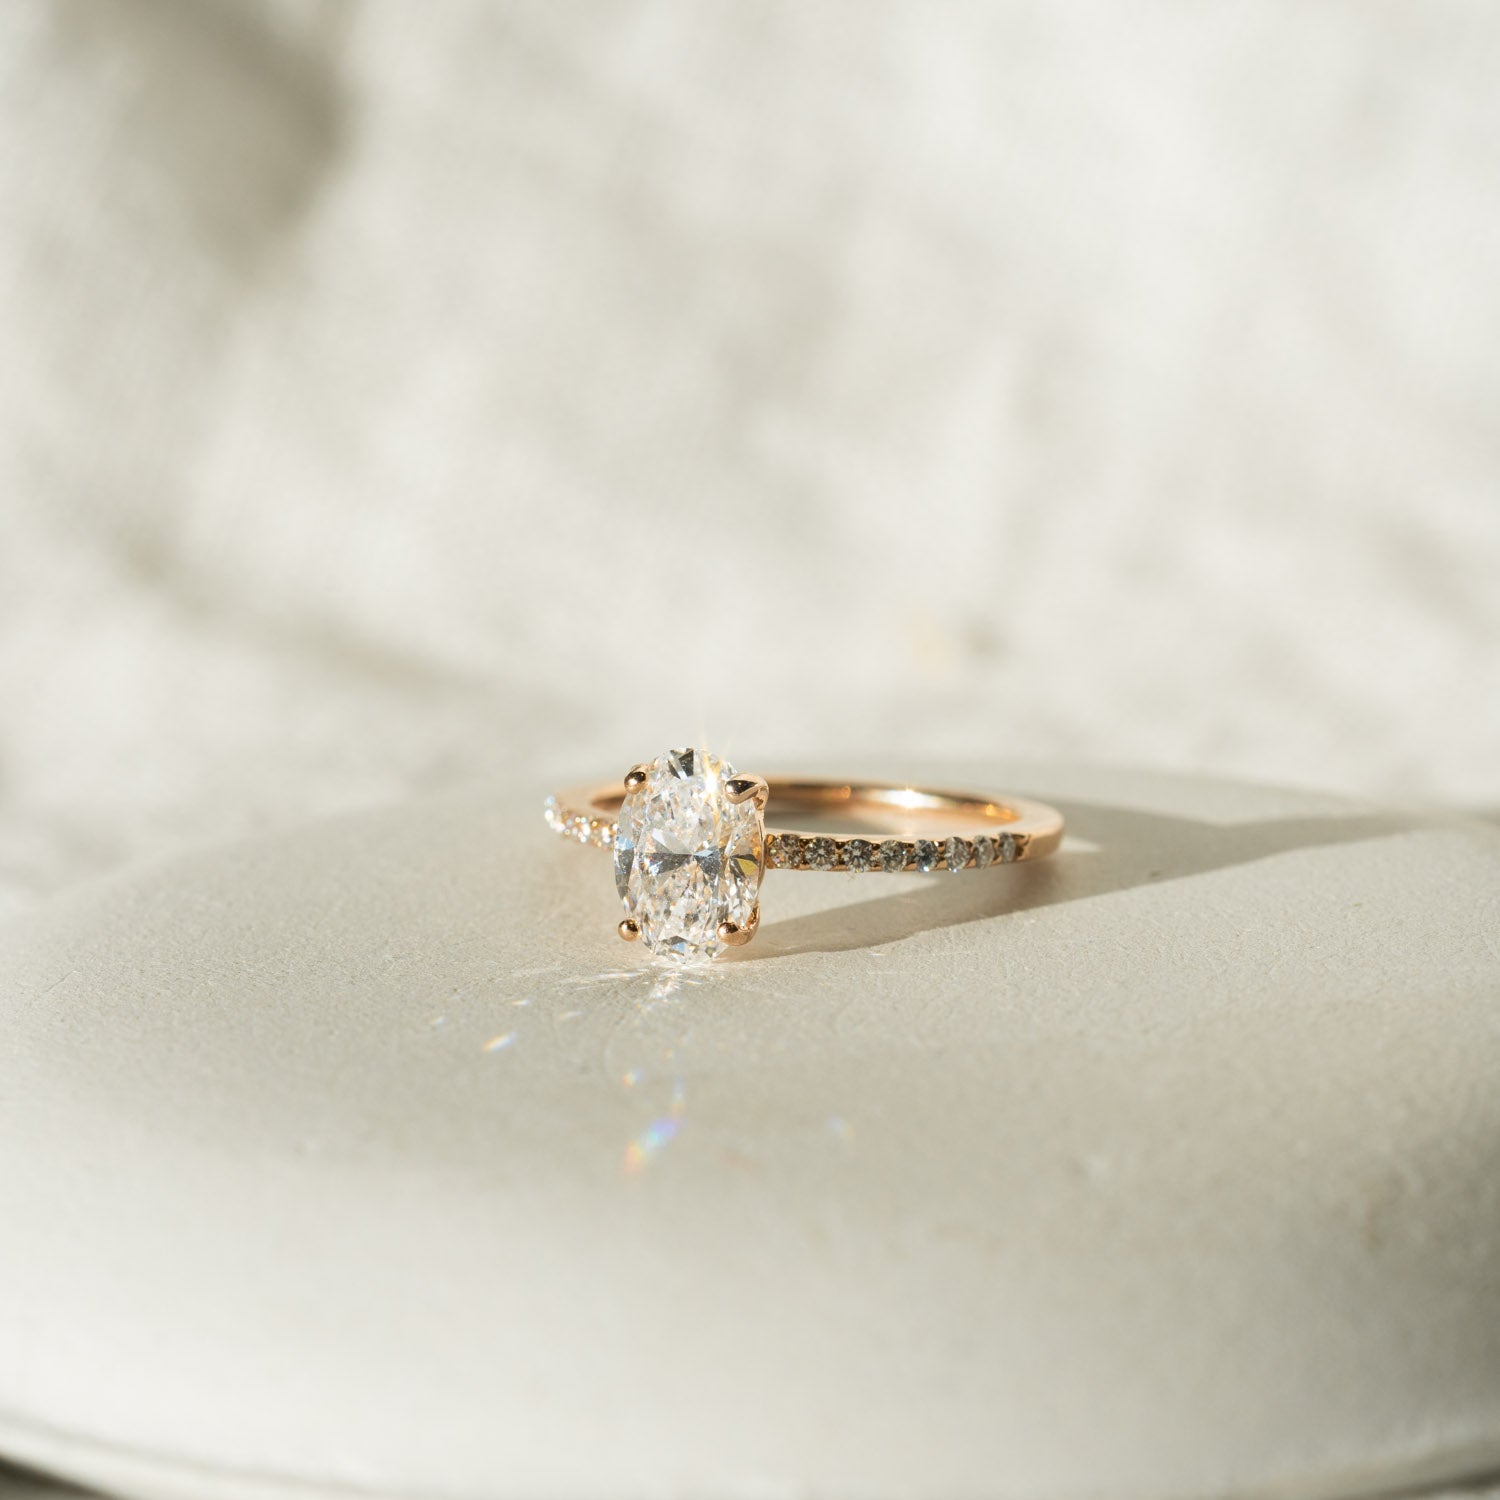 Oval shoulder set lab-grown diamond engagement ring on a white dish